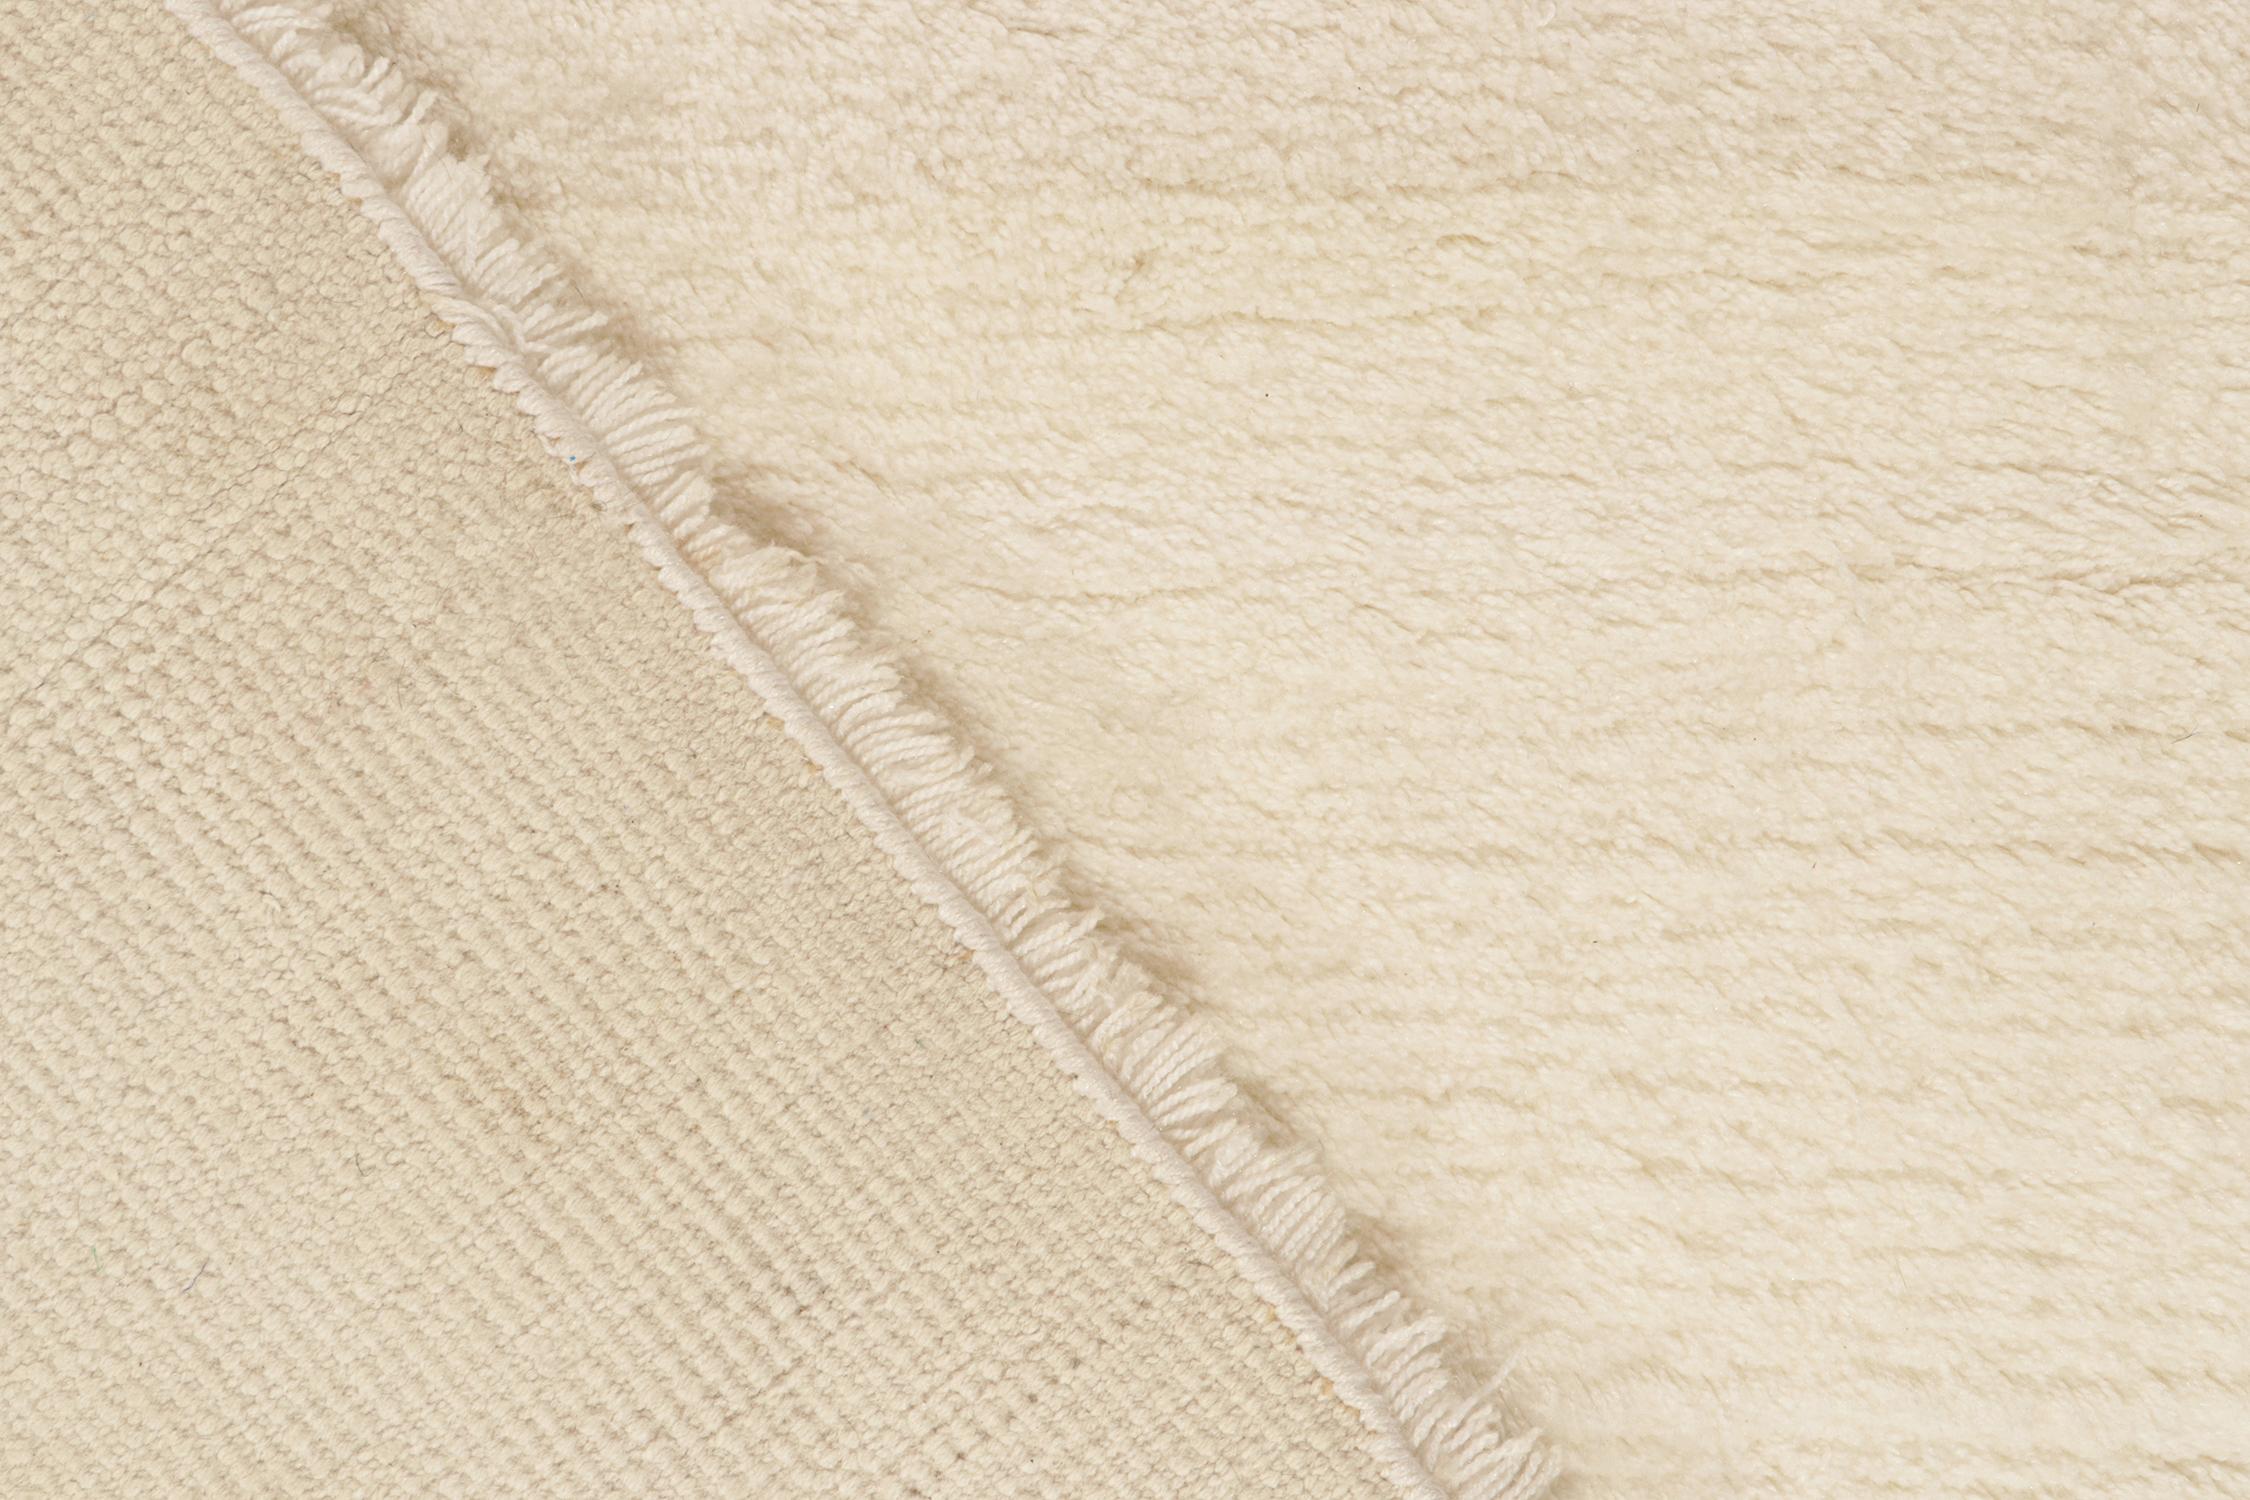 Rug & Kilim’s Contemporary Solid Rug in Tone-on-Tone Off-White and Ivory